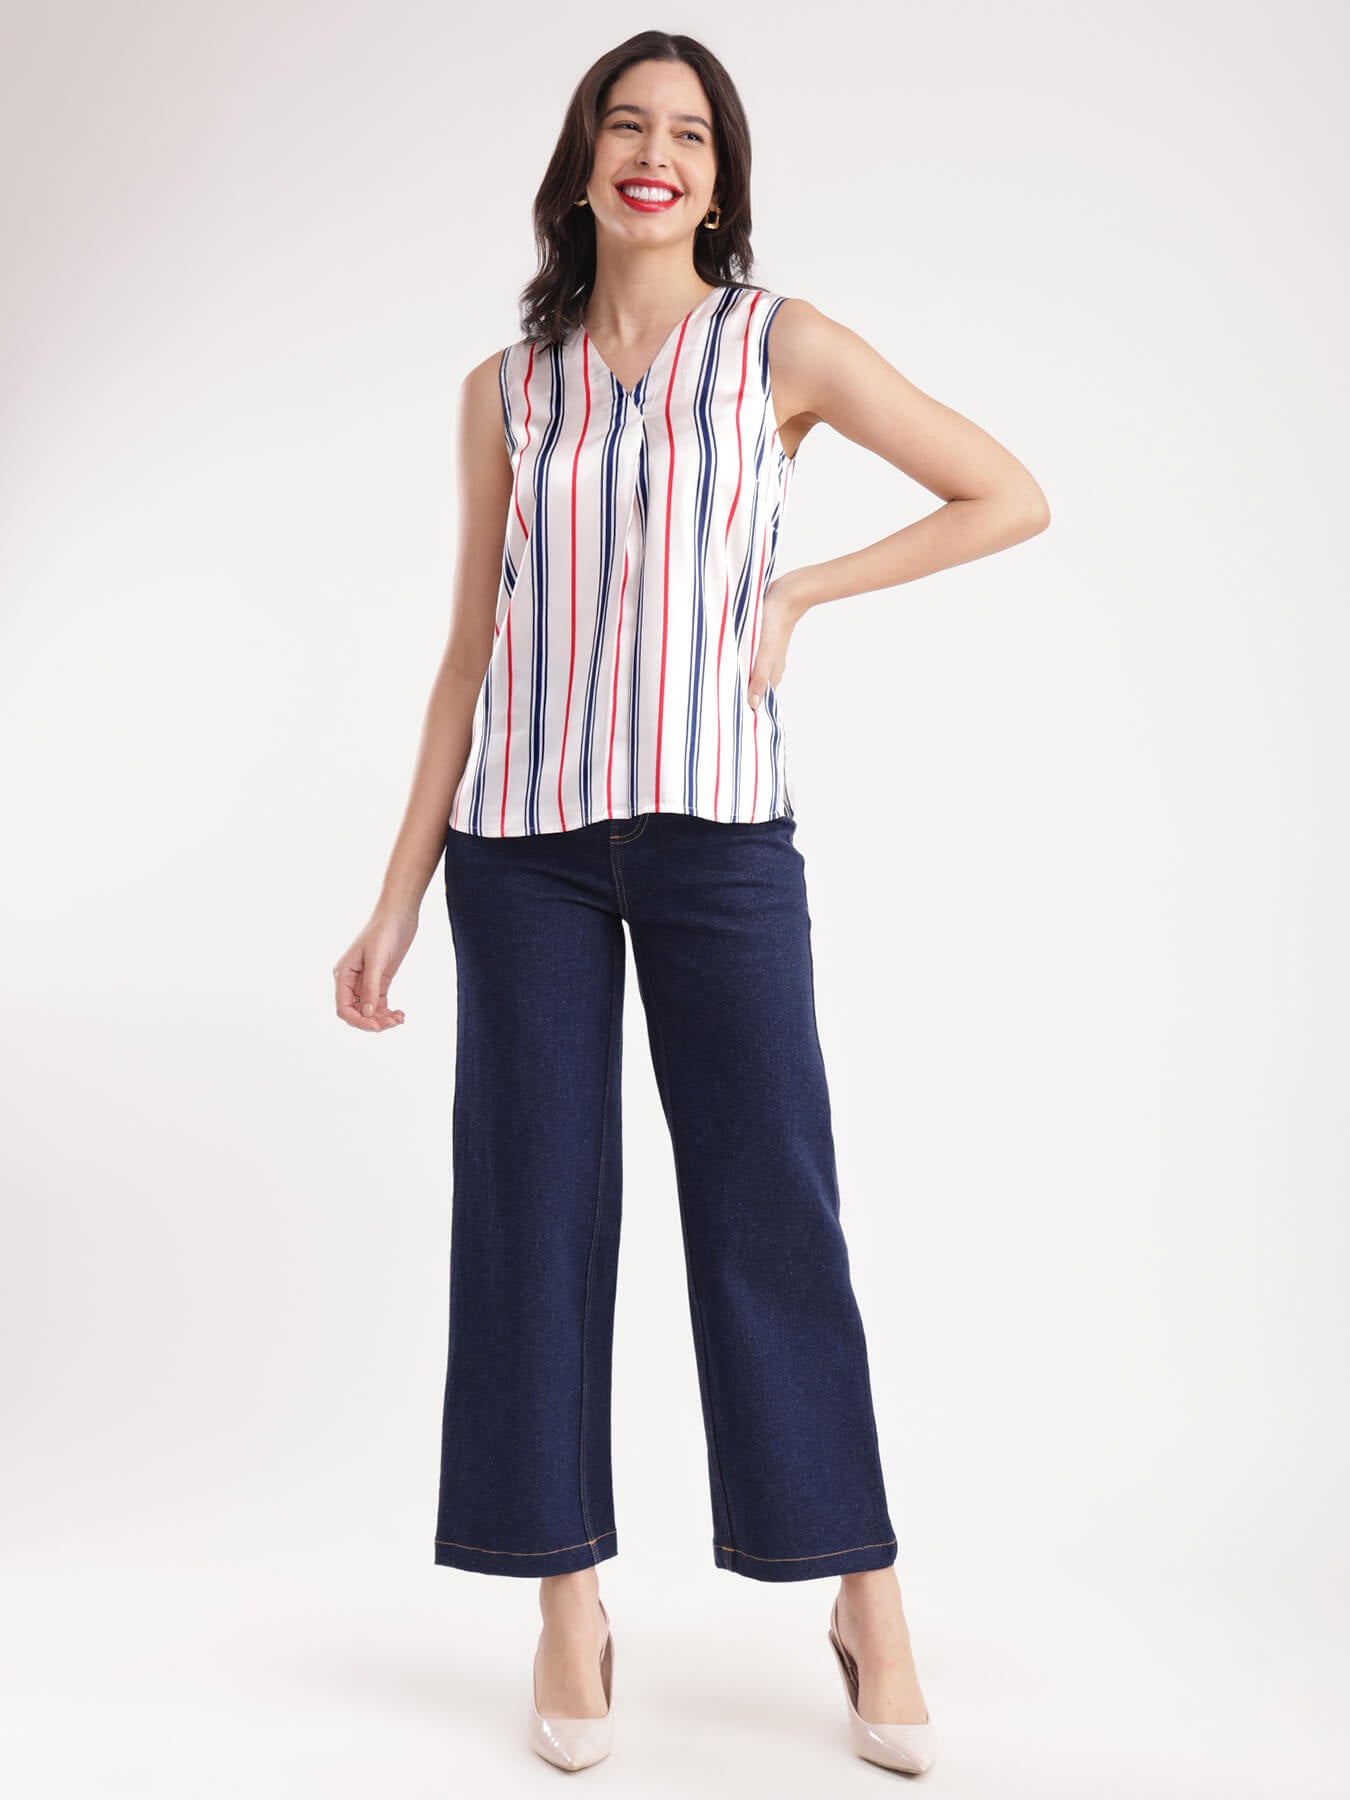 Satin Striped Top - White And Blue